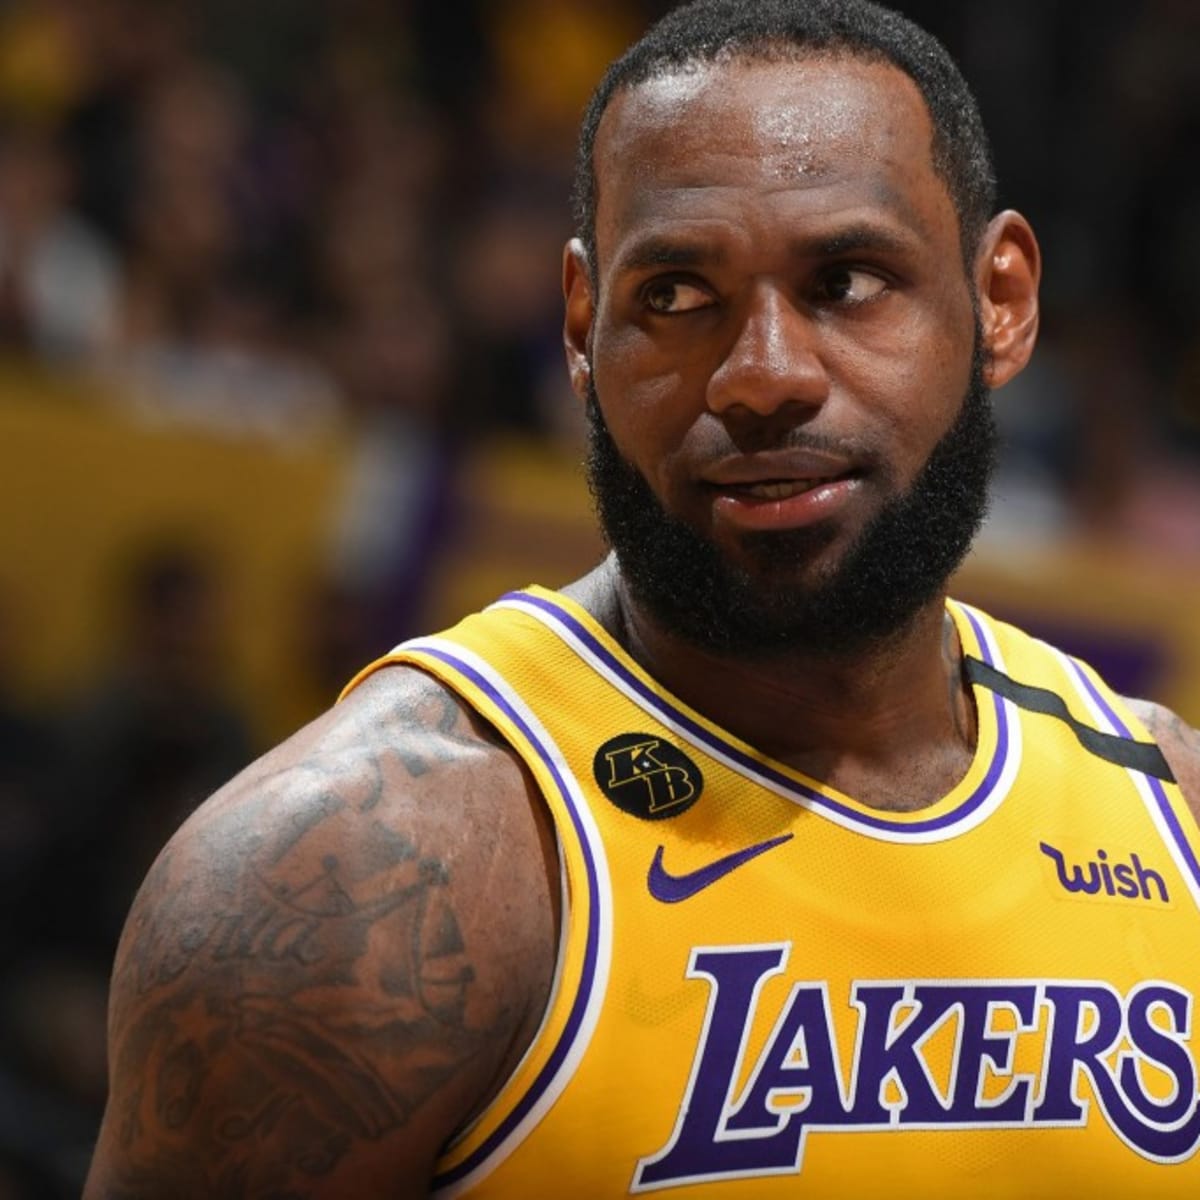 US Copyright suit launched against video game company over Kobe Bryant LeBron  James tattoos